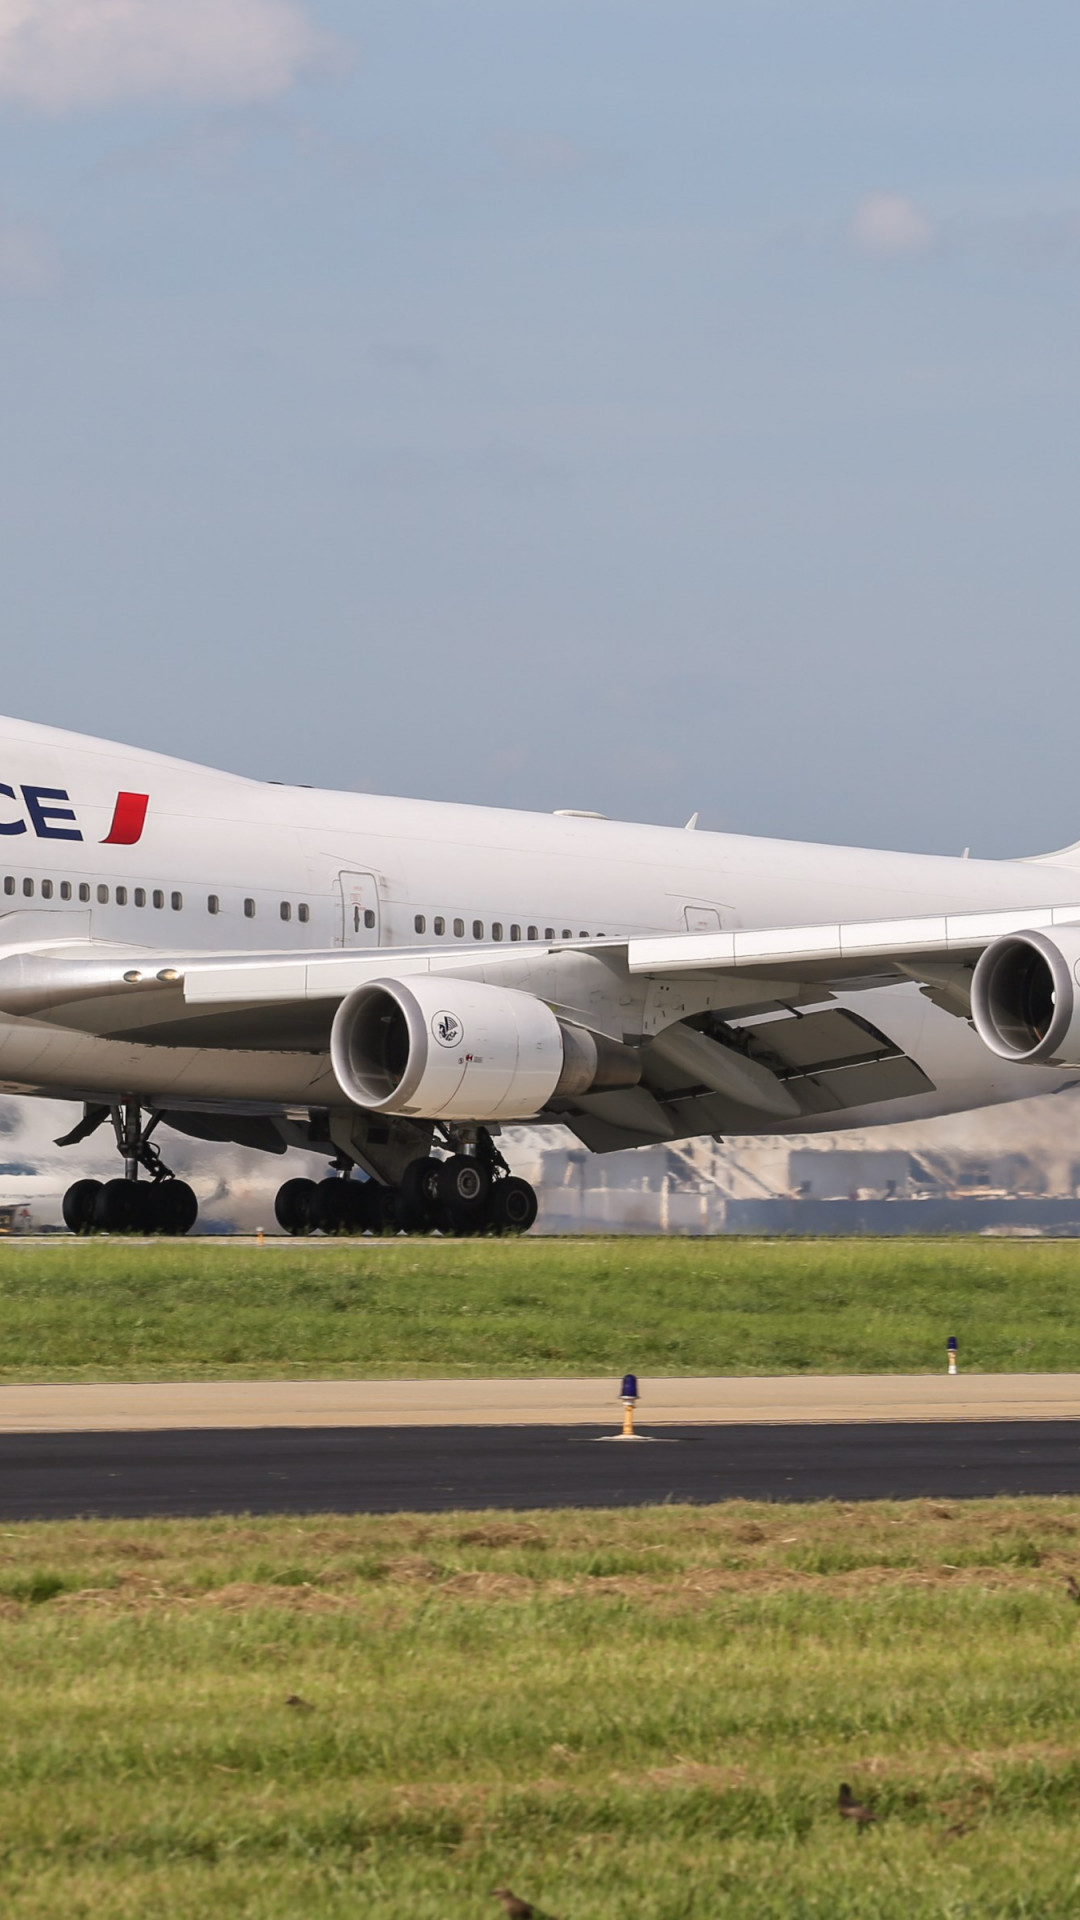 Download wallpaper: Air France Boeing 747 1080x1920